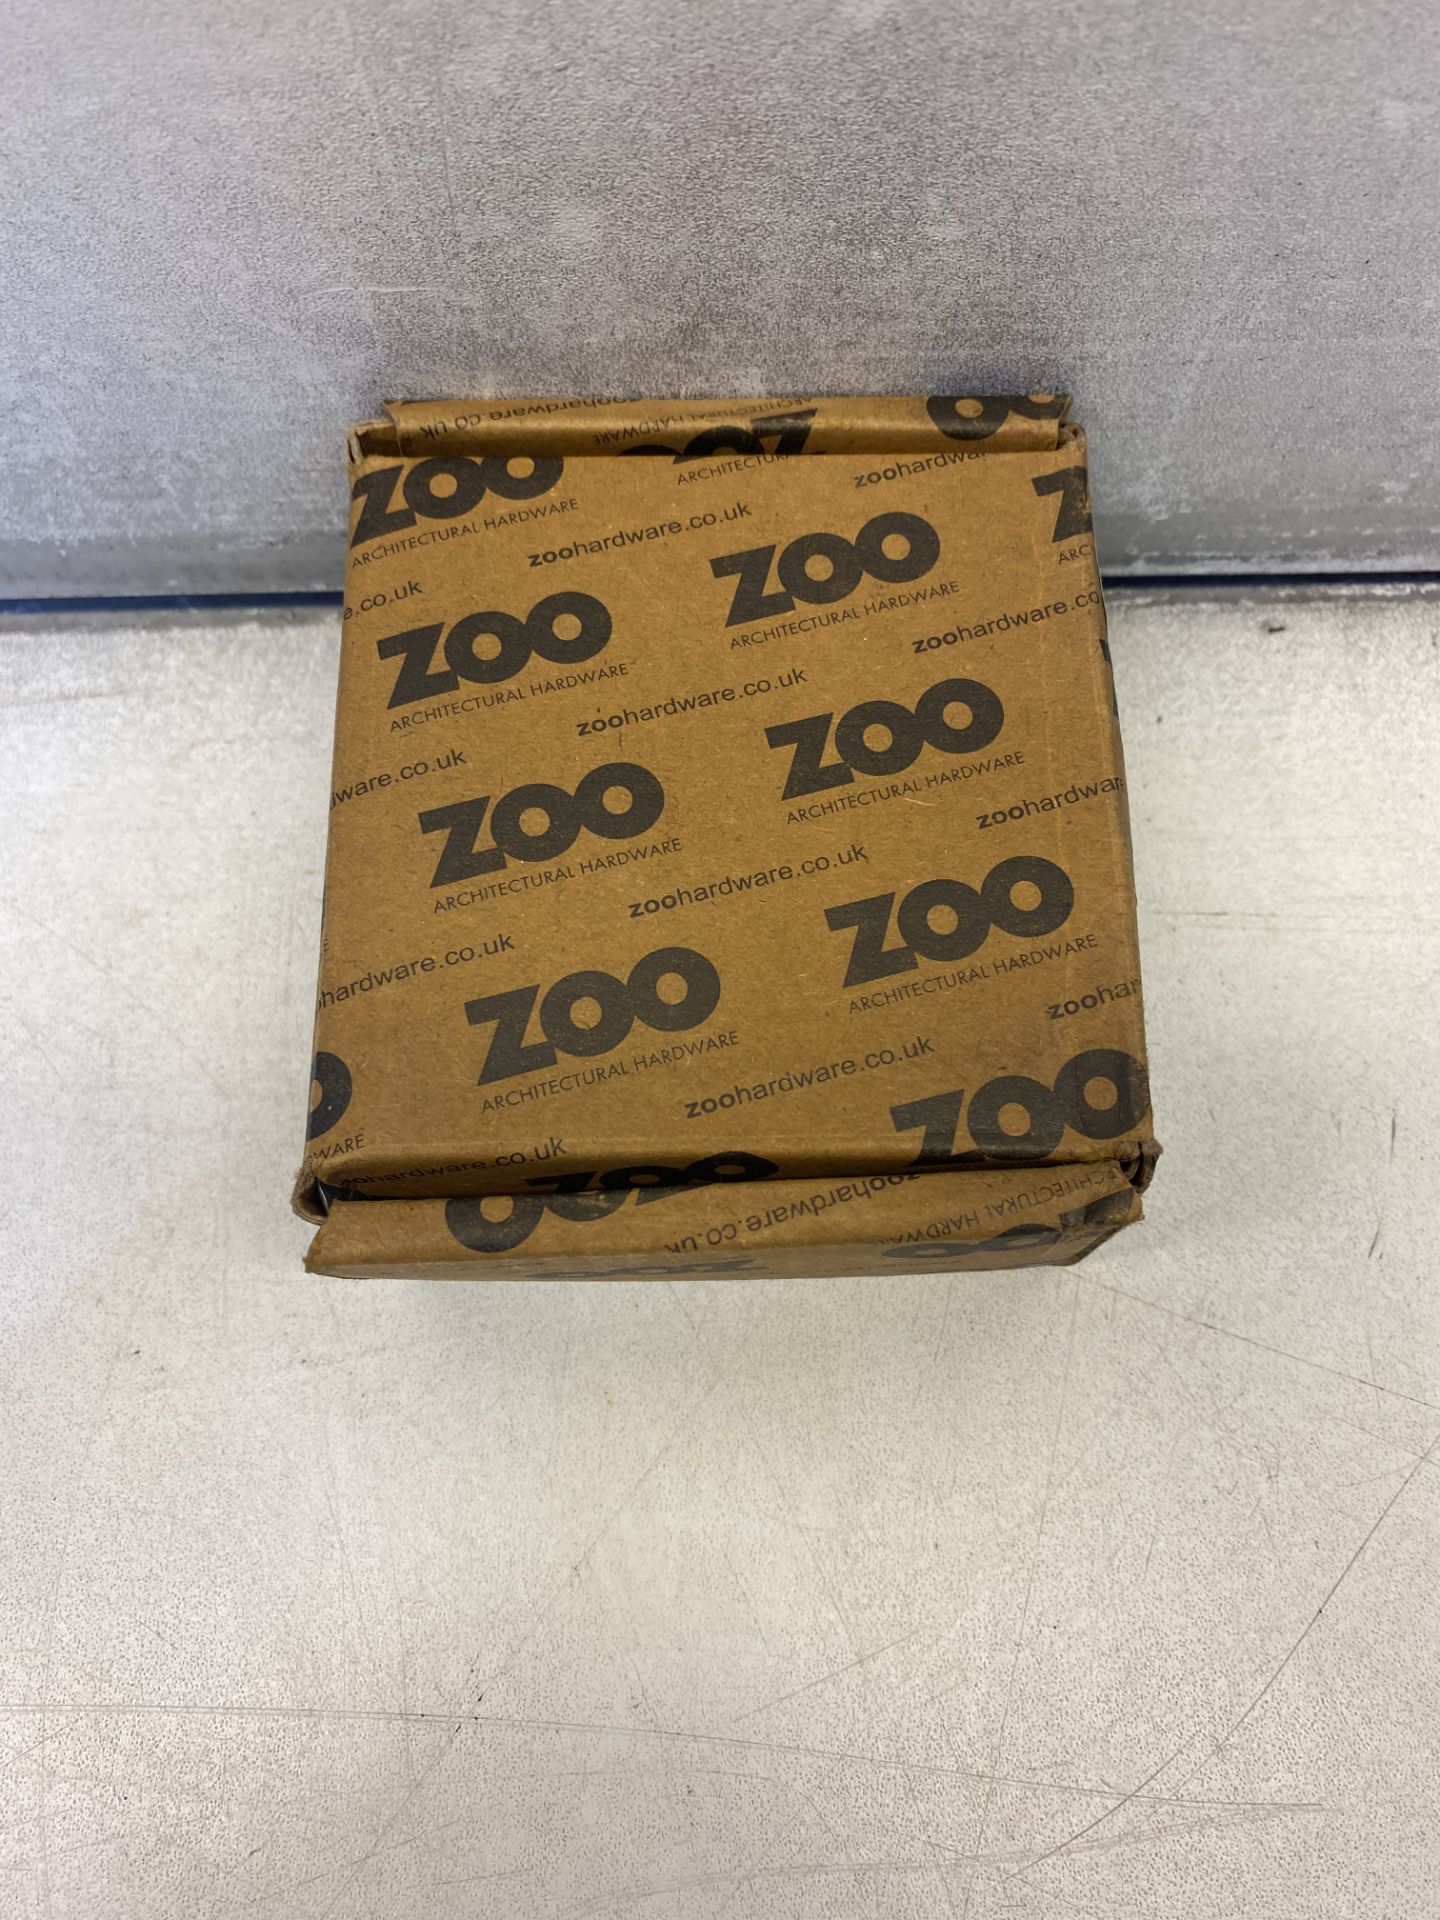 19 x Boxes Of Zoo Hardware - ZSS09SS Signage - Fire Door Keep Shut - 76mm dia Satin Stainless Steel - Image 3 of 3